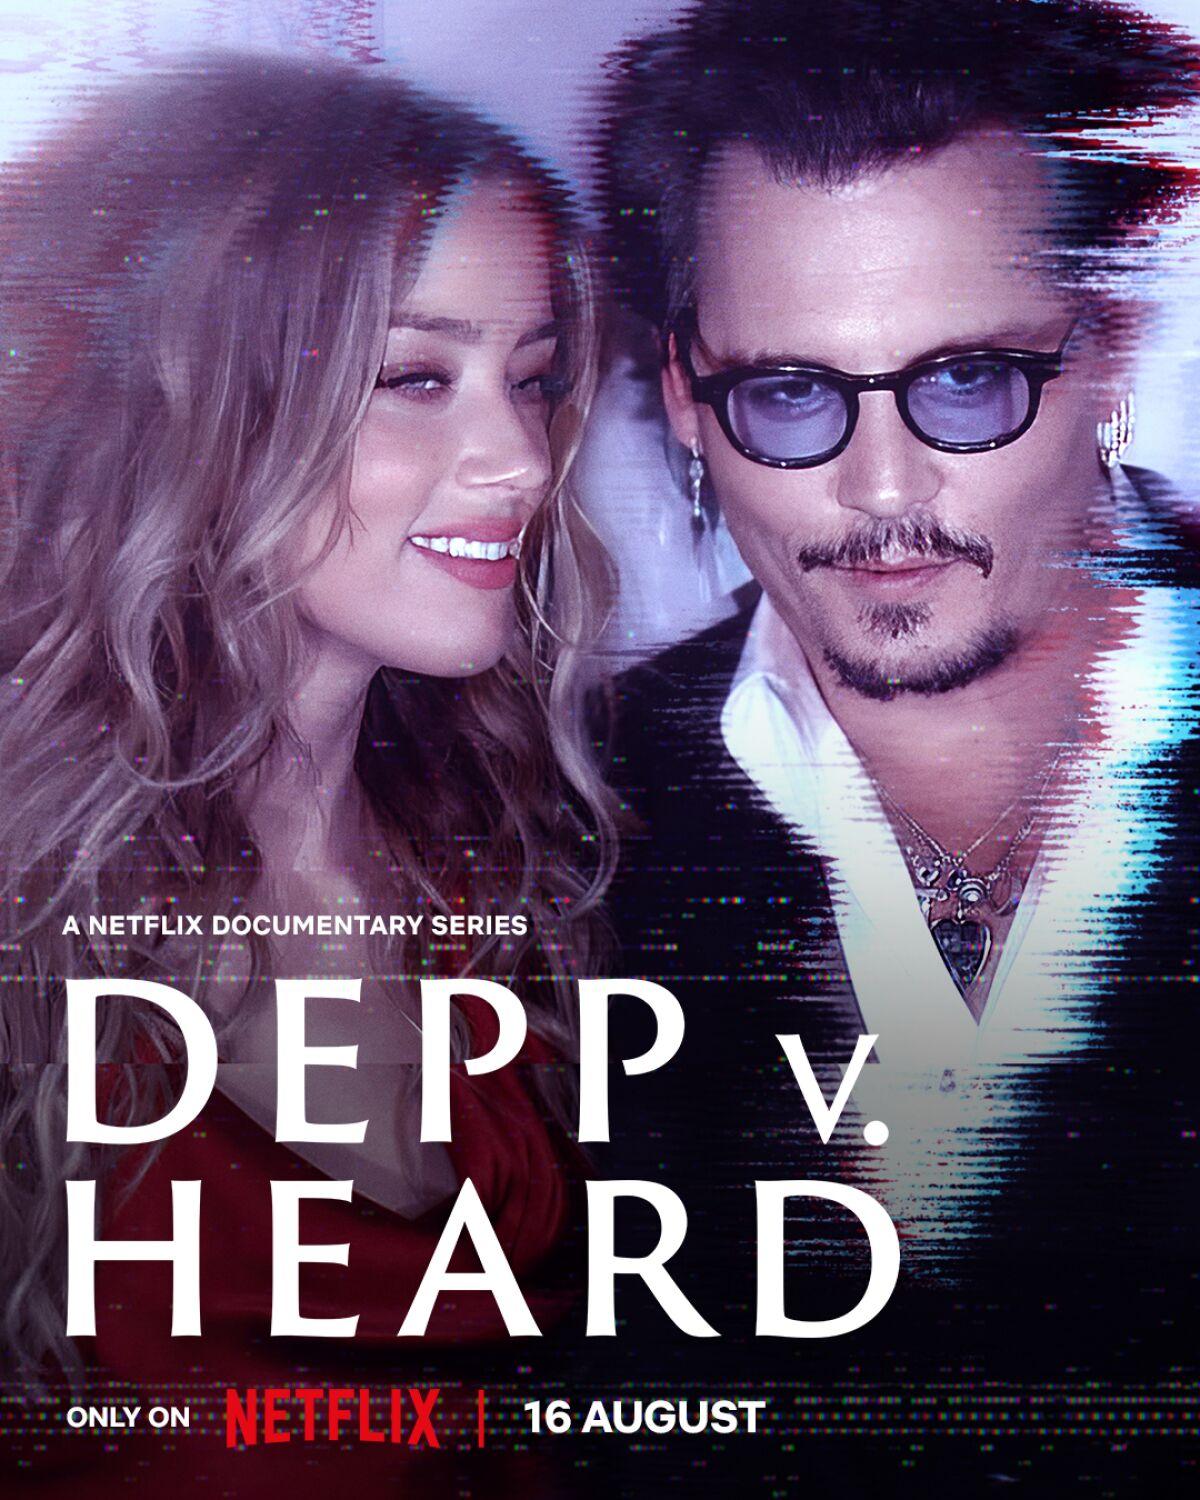 Depp v Heard (Netflix): Prepare to delve into the captivating narrative of Hollywood's most scandalous courtroom trial through the lens of a limited three-part series, aptly titled Depp v Heard.